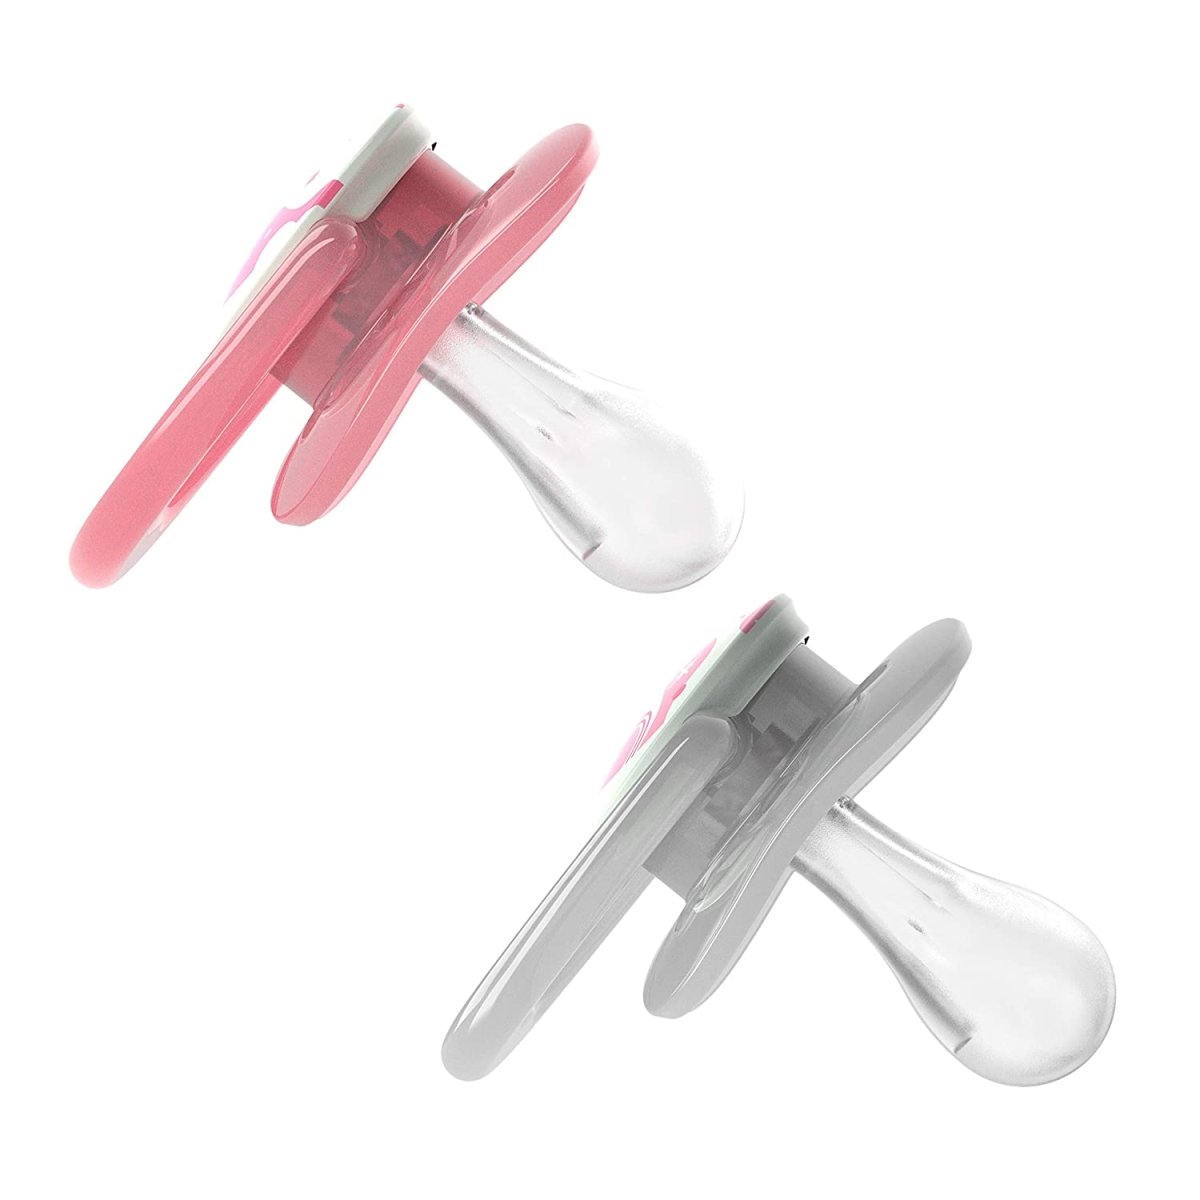 Dr. Browns Advantage Pacifiers, Stage 1, Glow in the Dark, Pack of 2 - Pink - DBPA12003-INTL